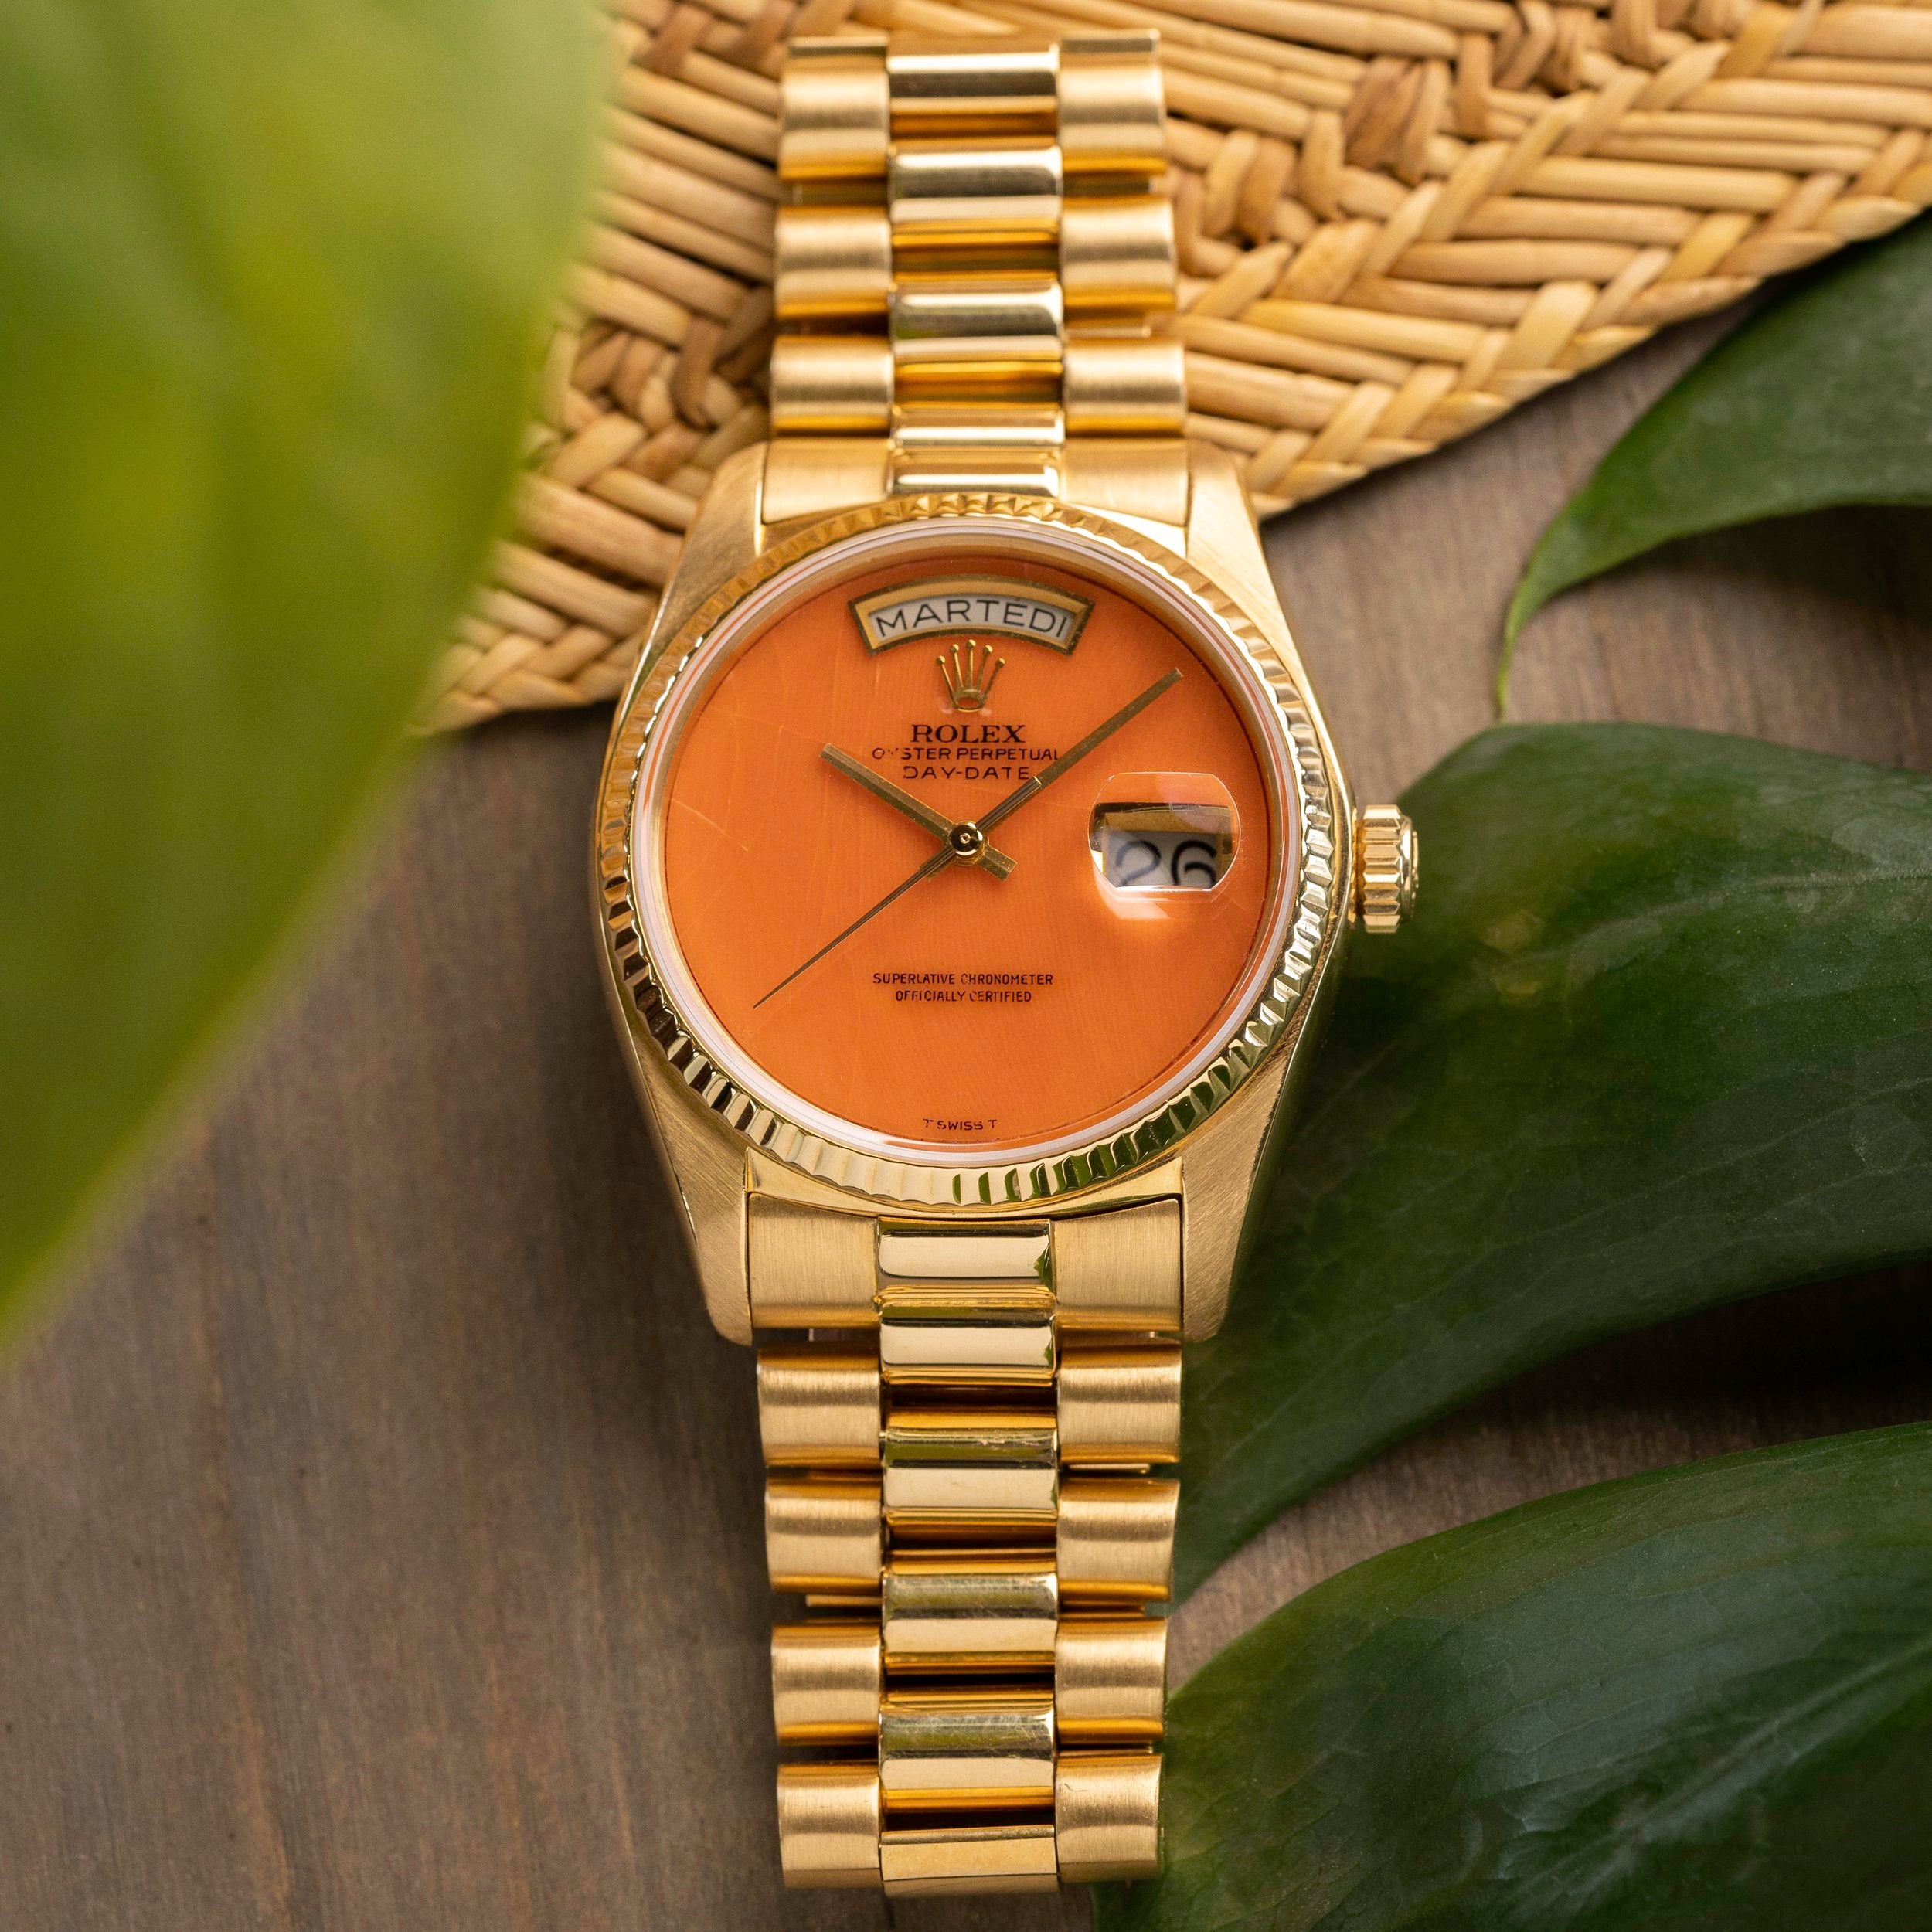 Rolex Day-Date Ref. 18038 - 'Coral' Dial